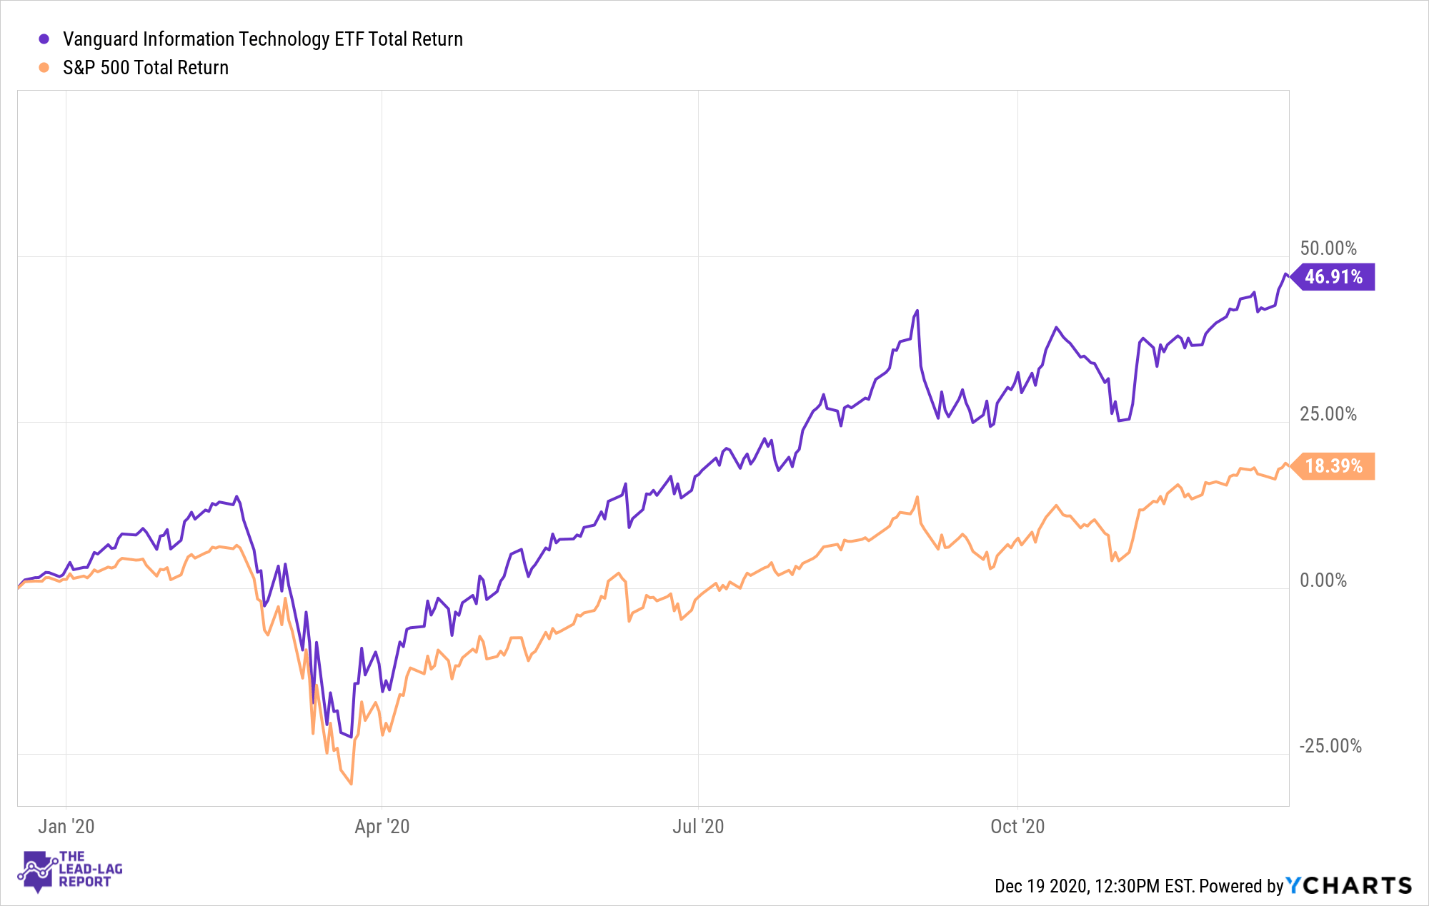 Vanguard Information Technology ETF is performing really well this year